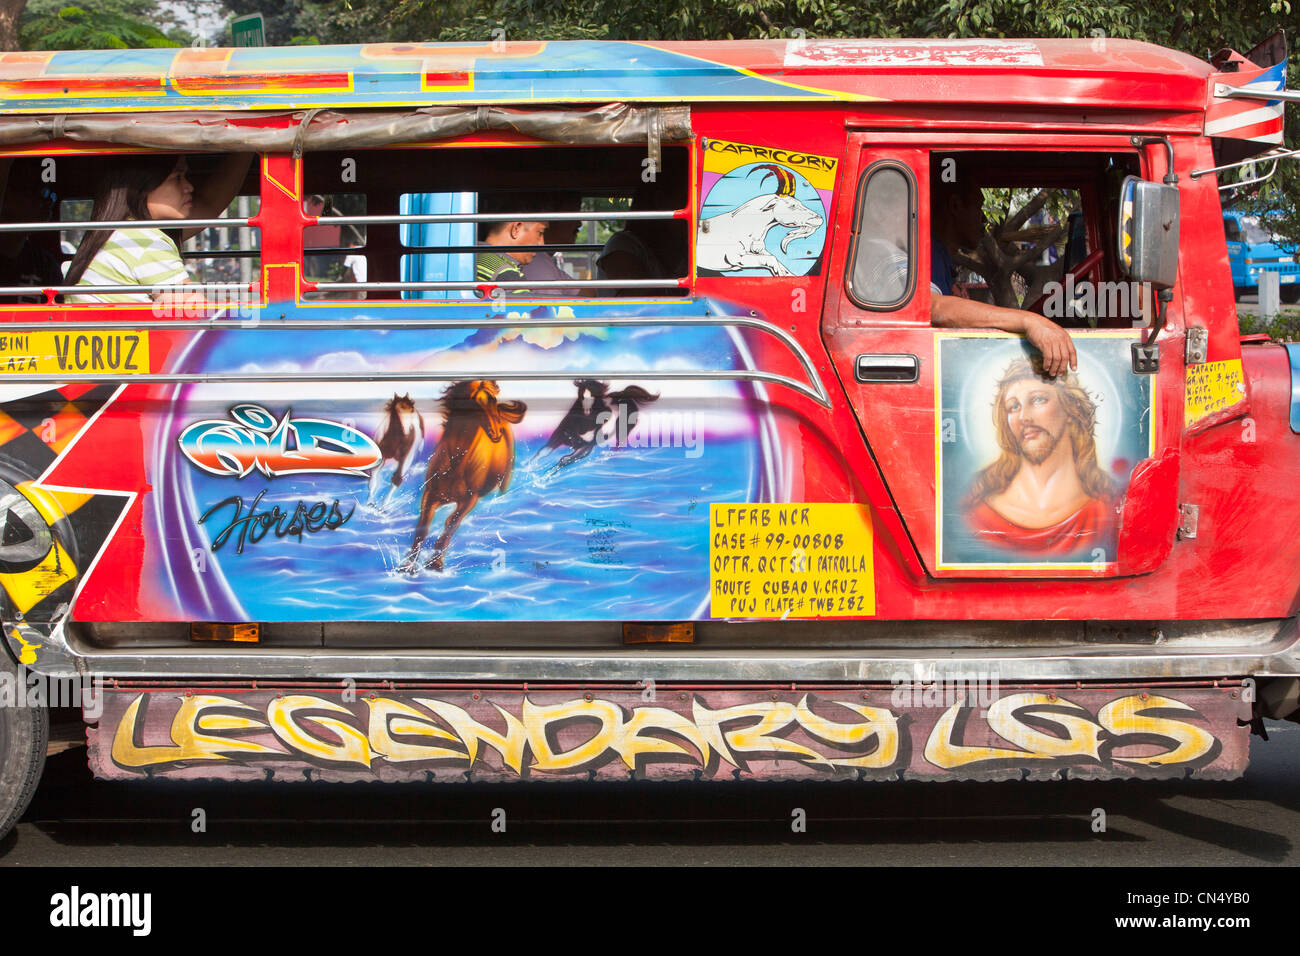 Philippines, Luzon island, Manila, Ermita district, a jeepney (jeep extended to carry passengers) Stock Photo